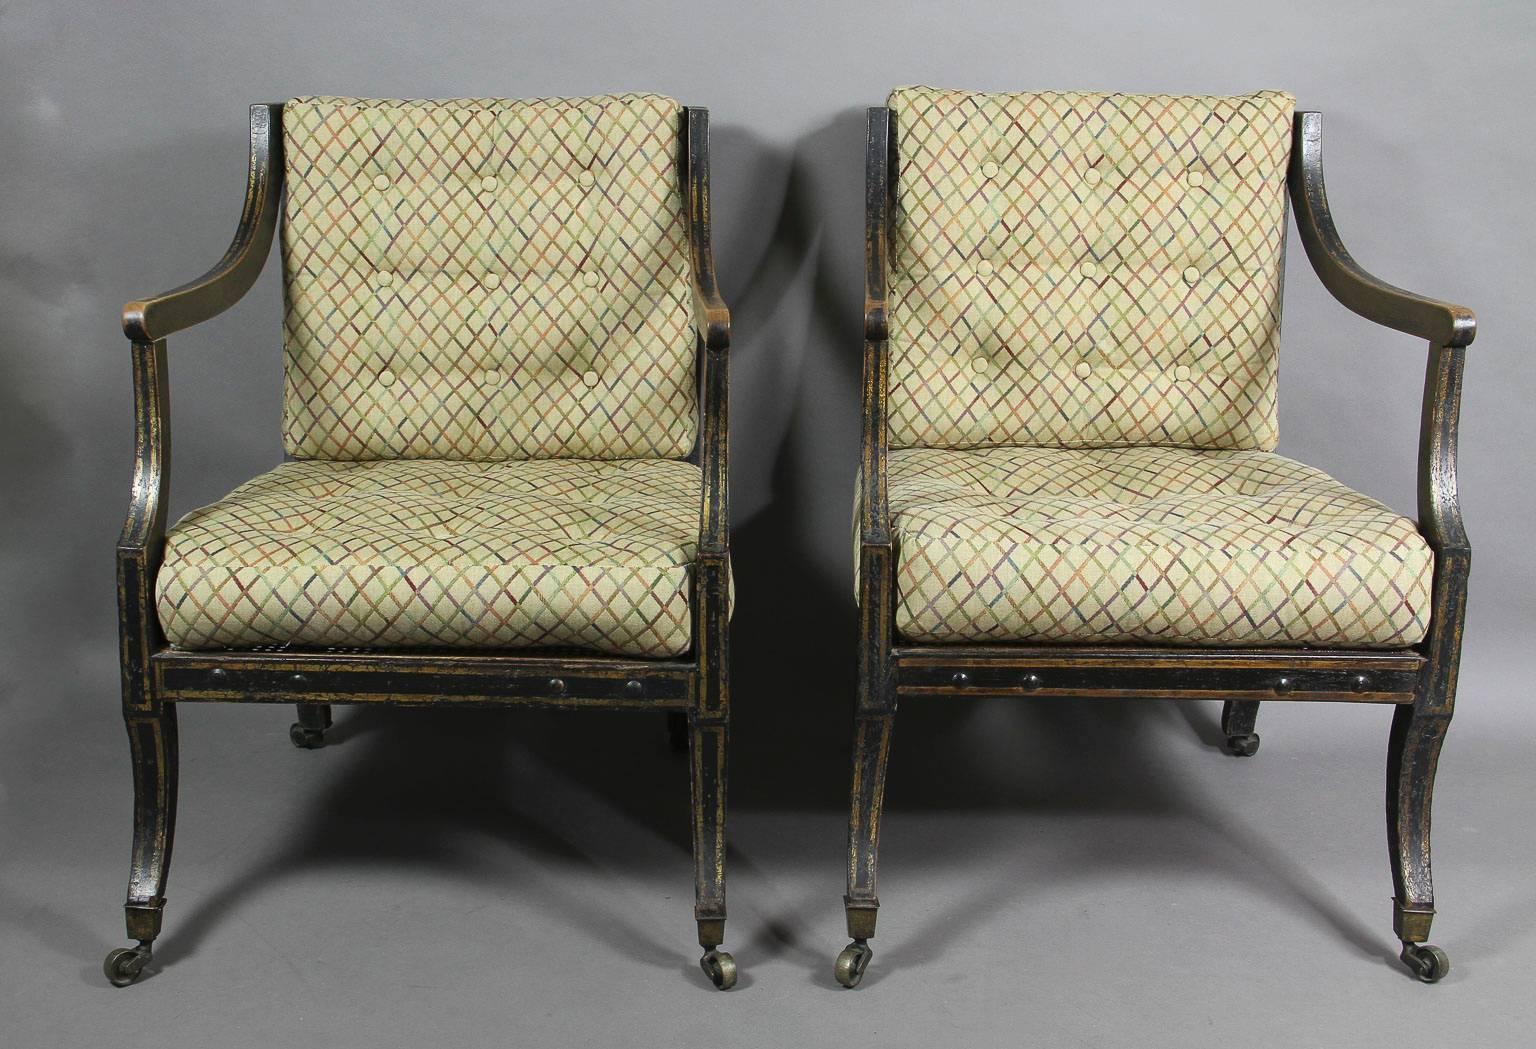 English Pair of Regency Ebonized and Gilded Caned Armchairs